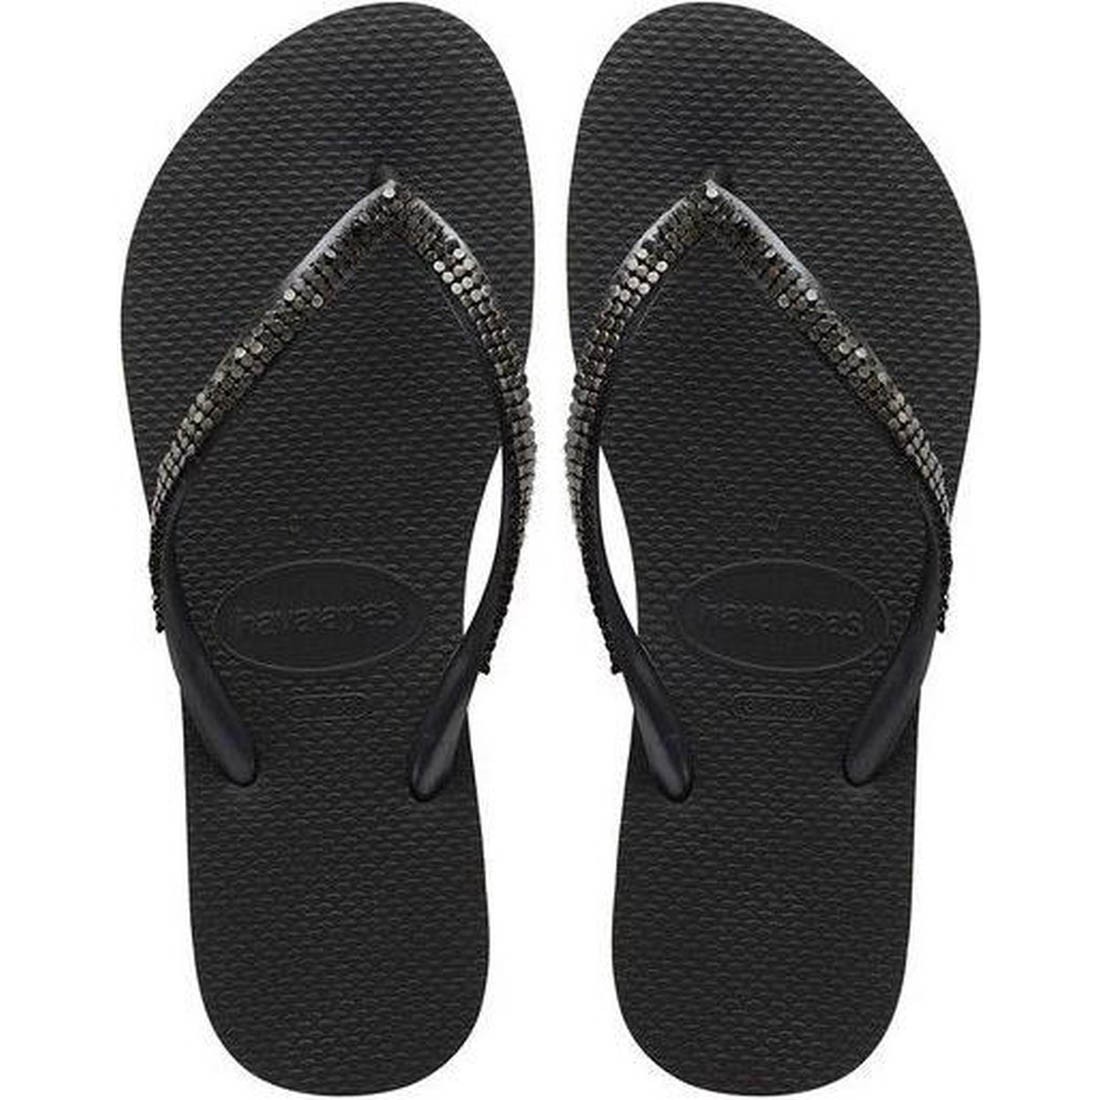 Buy Havaianas Slim Metal Mesh Black - Havaianas, delivered to your home |  The Outfit